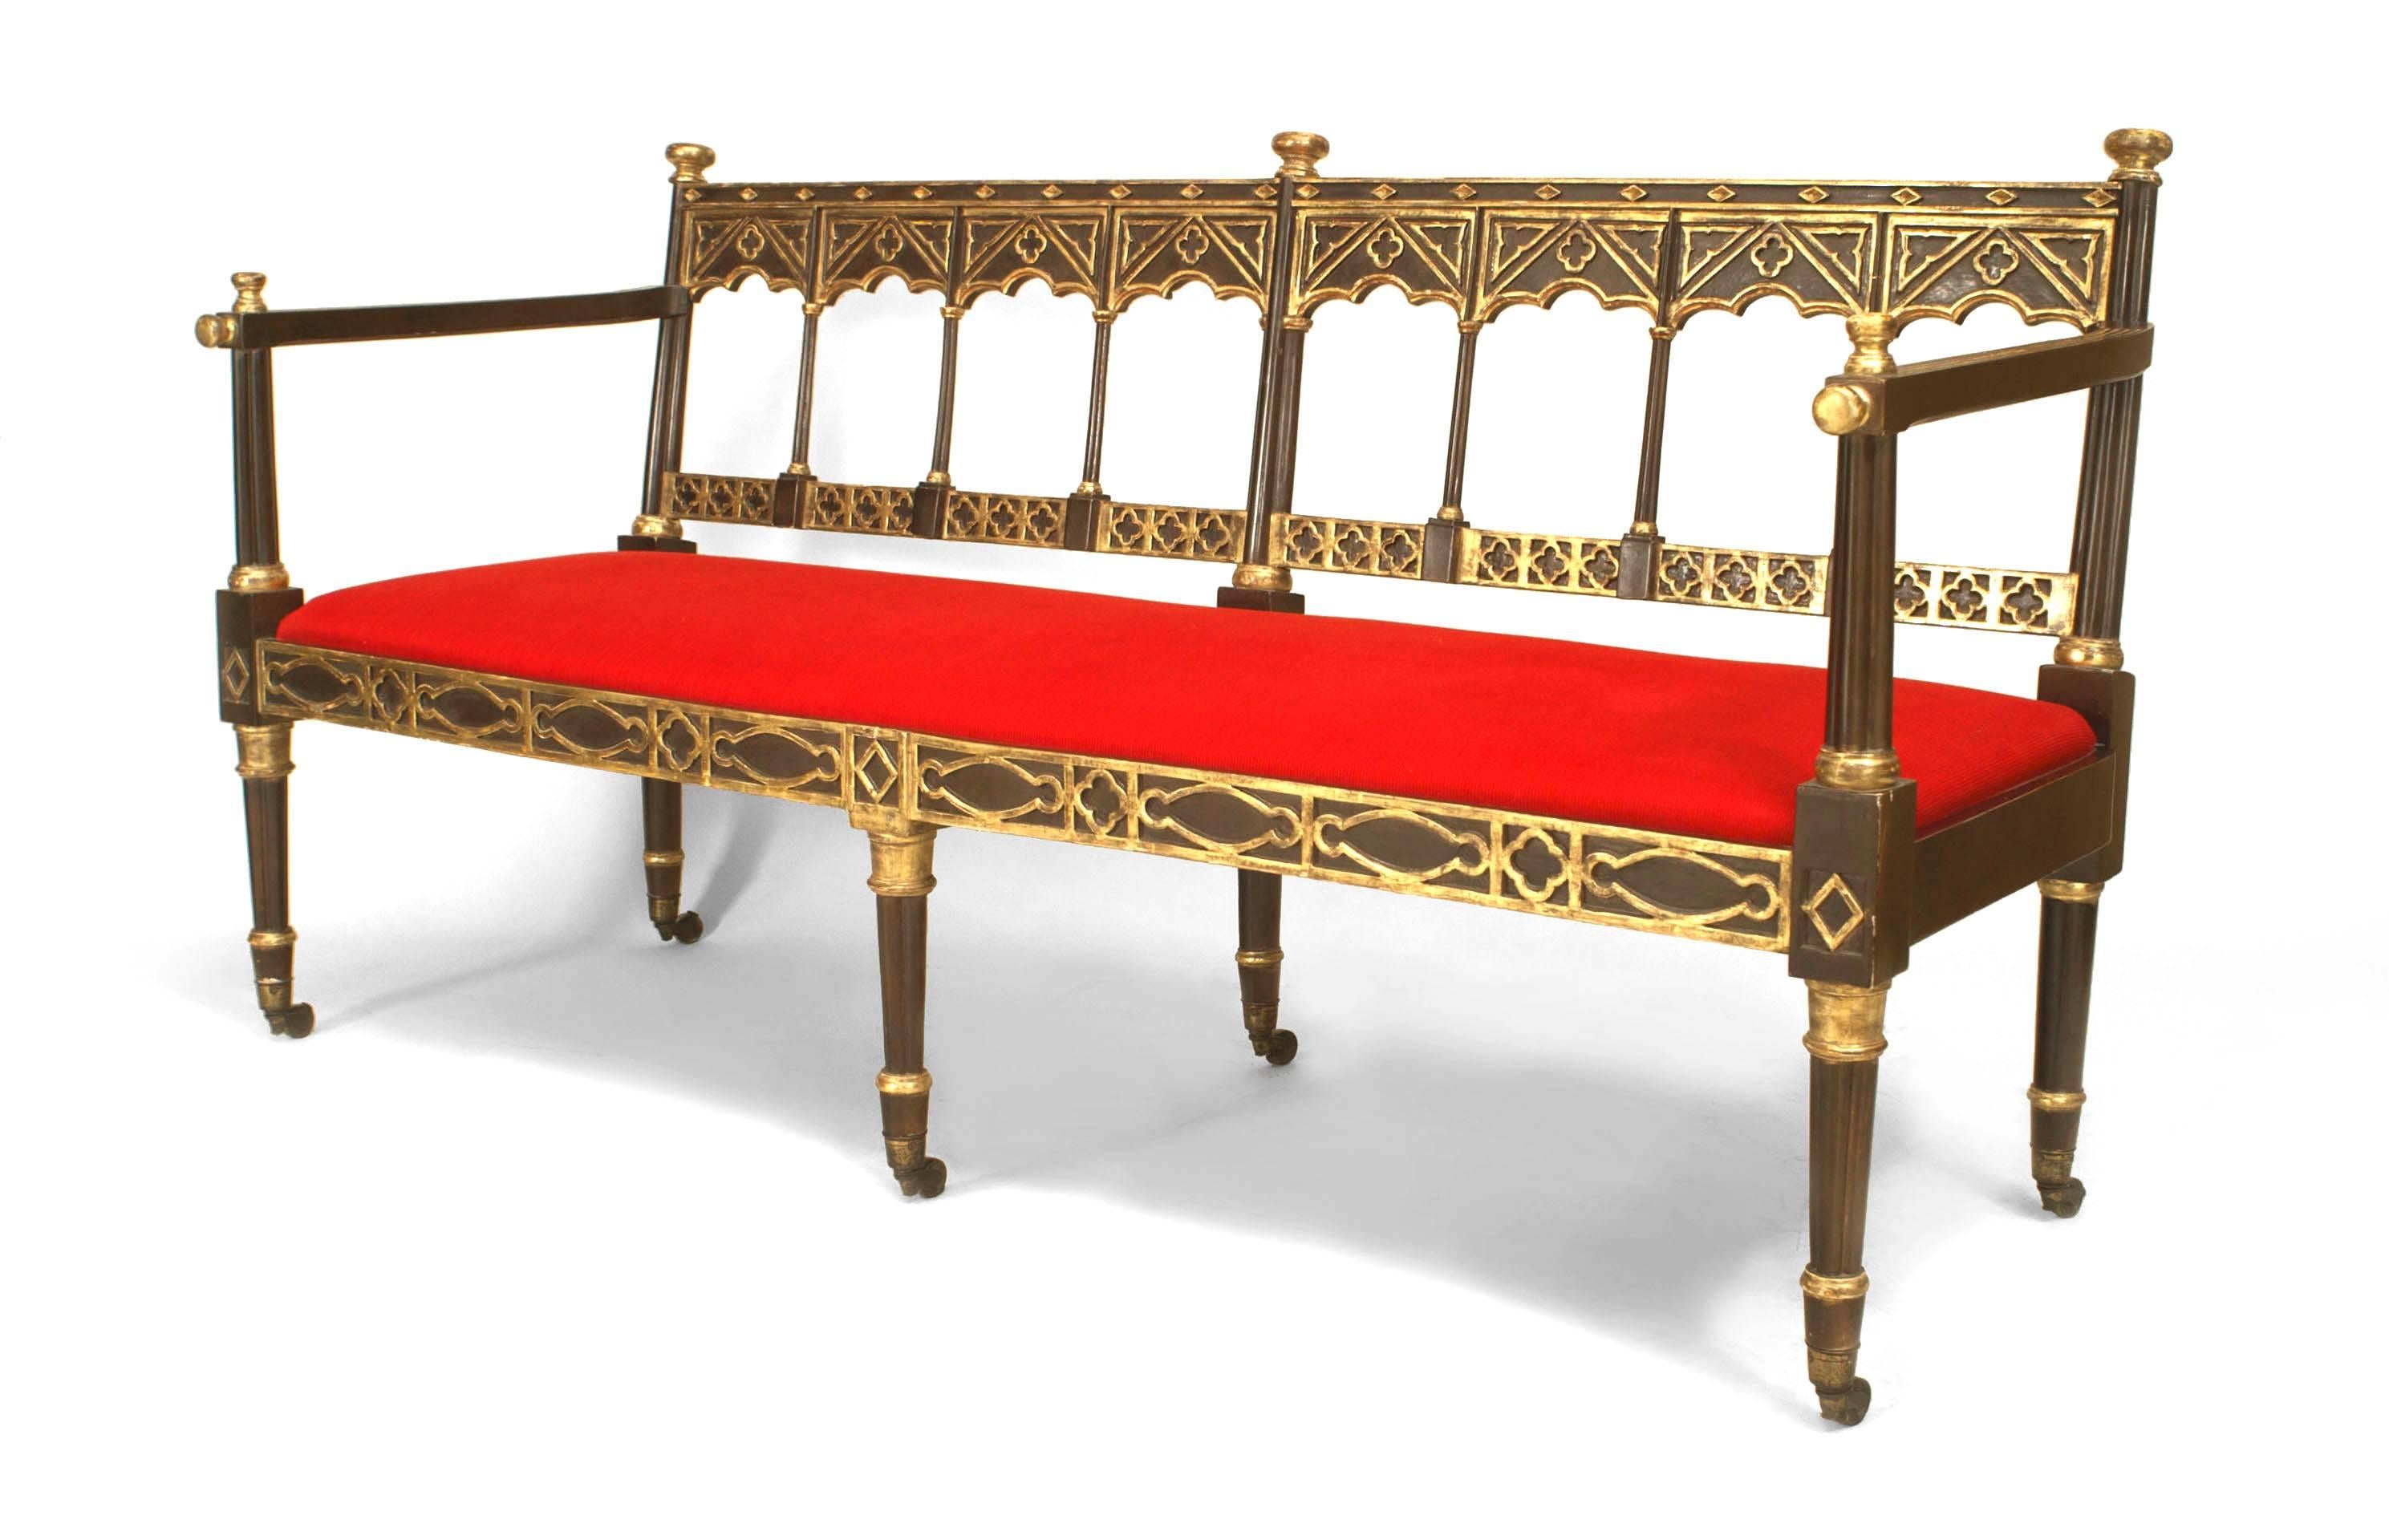 English Regency ebonized settee with painted and gilt trim and pierced back with lattice design with square arms and tapered legs with an inset upholstered seat
